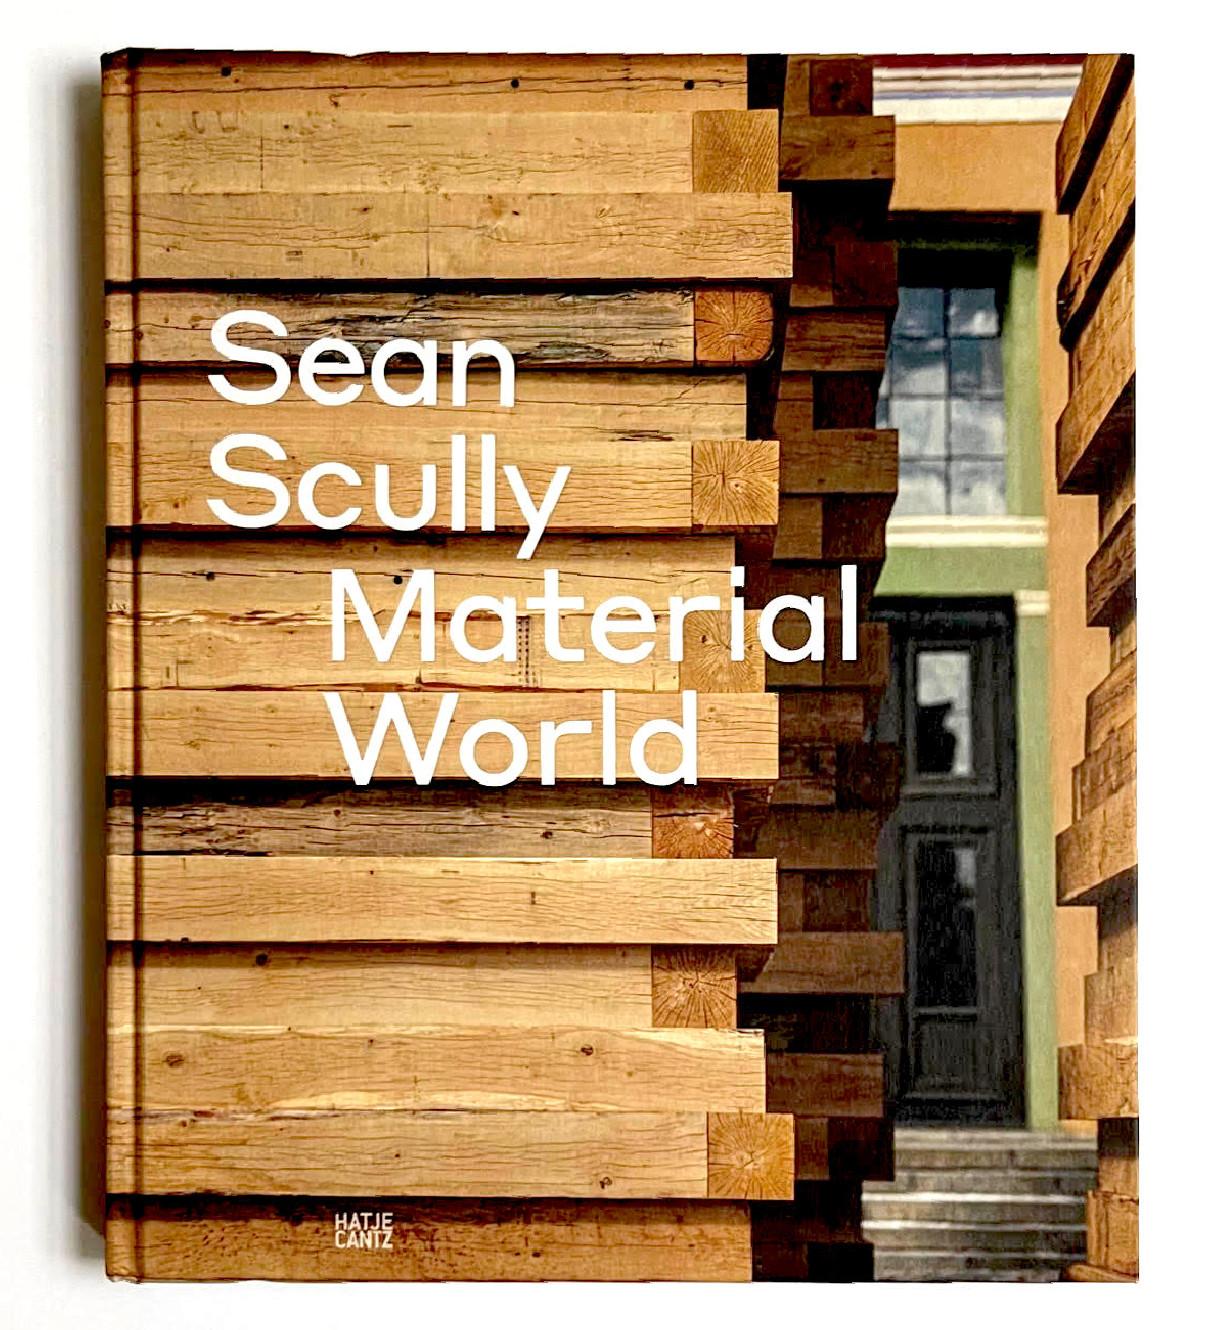 Sean Scully: Material World (Monograph Hand signed and dated by Sean Scully) For Sale 1